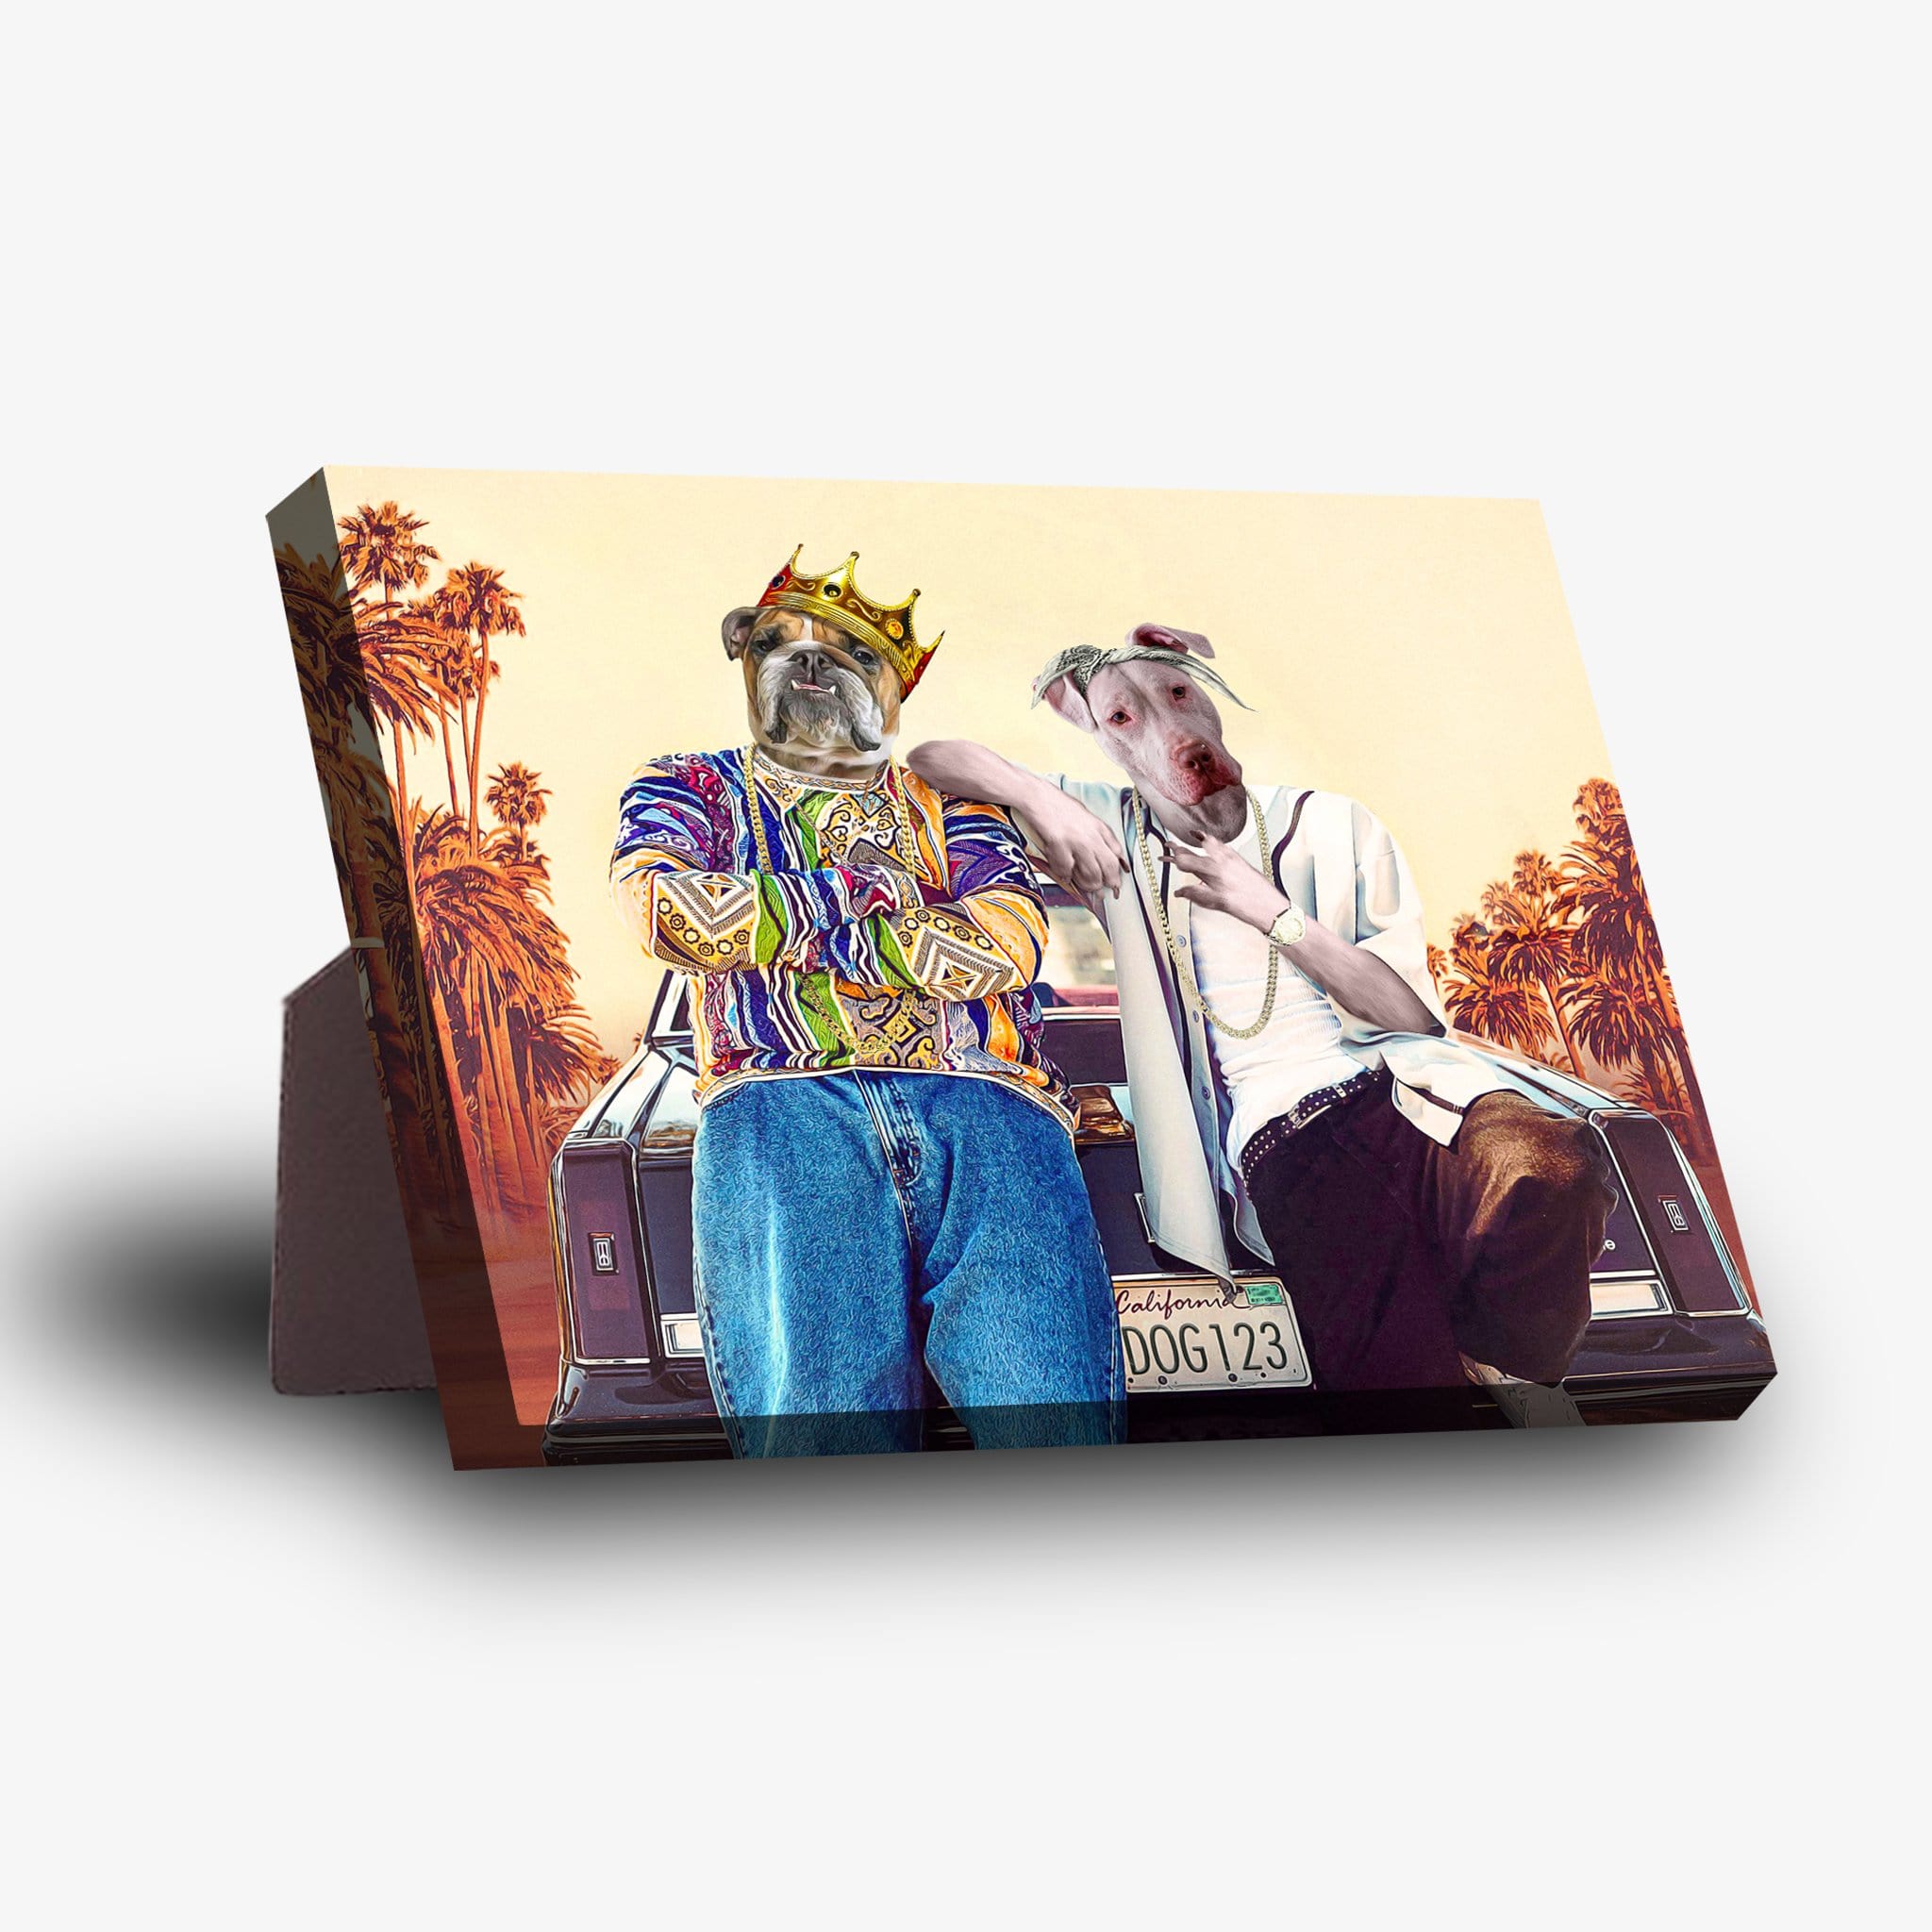 '2Paw and Notorious D.O.G. California Edition' Personalized 2 Pet Standing Canvas